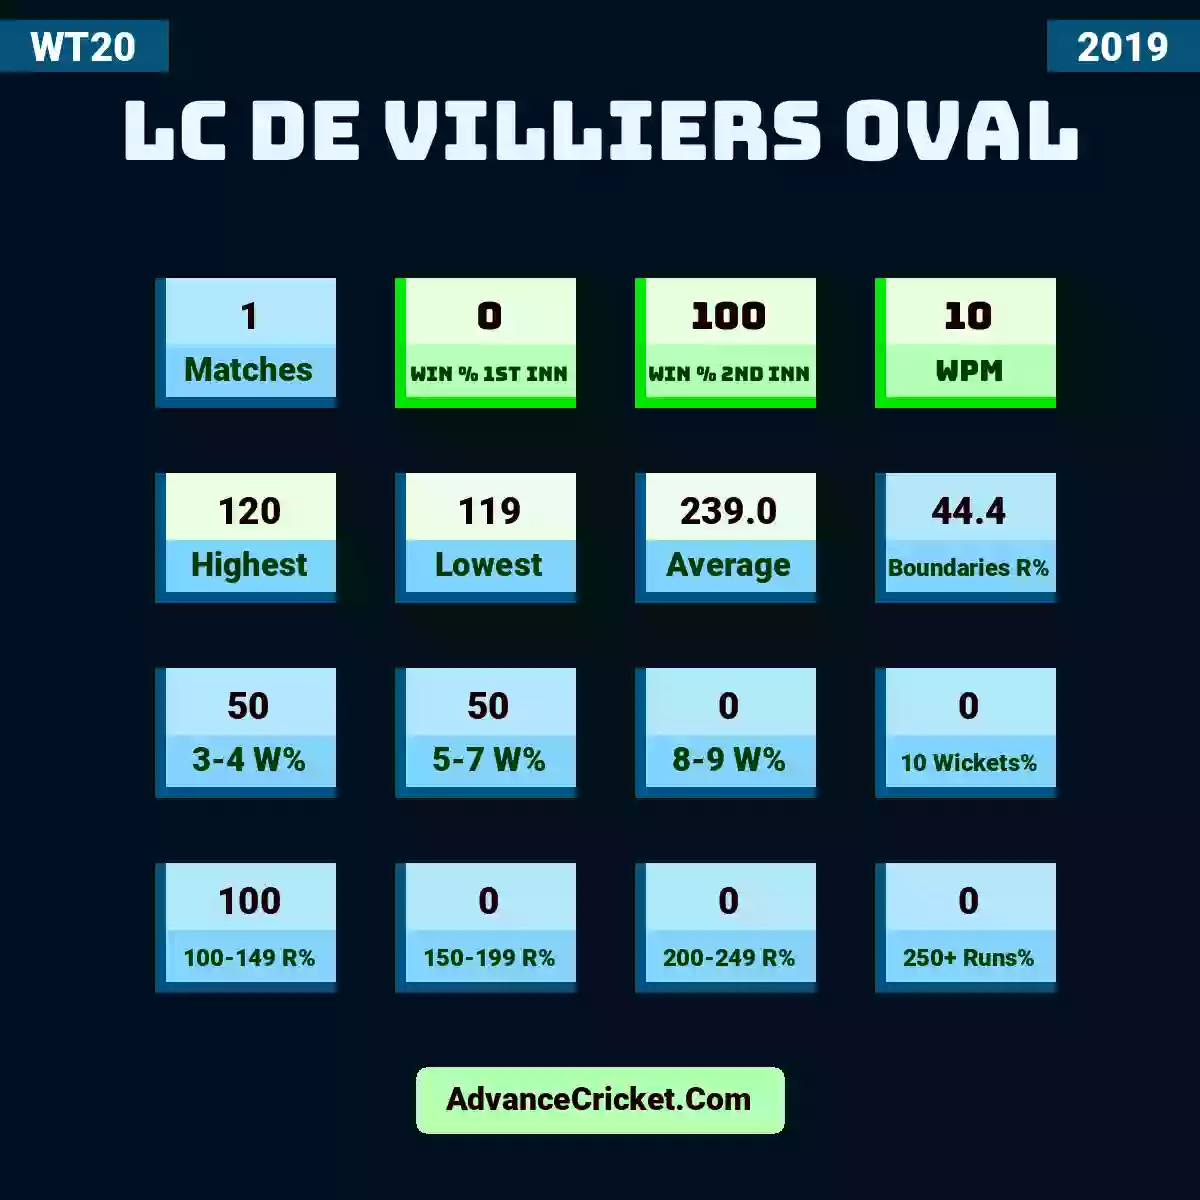 Image showing LC de Villiers Oval with Matches: 1, Win % 1st Inn: 0, Win % 2nd Inn: 100, WPM: 10, Highest: 120, Lowest: 119, Average: 239.0, Boundaries R%: 44.4, 3-4 W%: 50, 5-7 W%: 50, 8-9 W%: 0, 10 Wickets%: 0, 100-149 R%: 100, 150-199 R%: 0, 200-249 R%: 0, 250+ Runs%: 0.